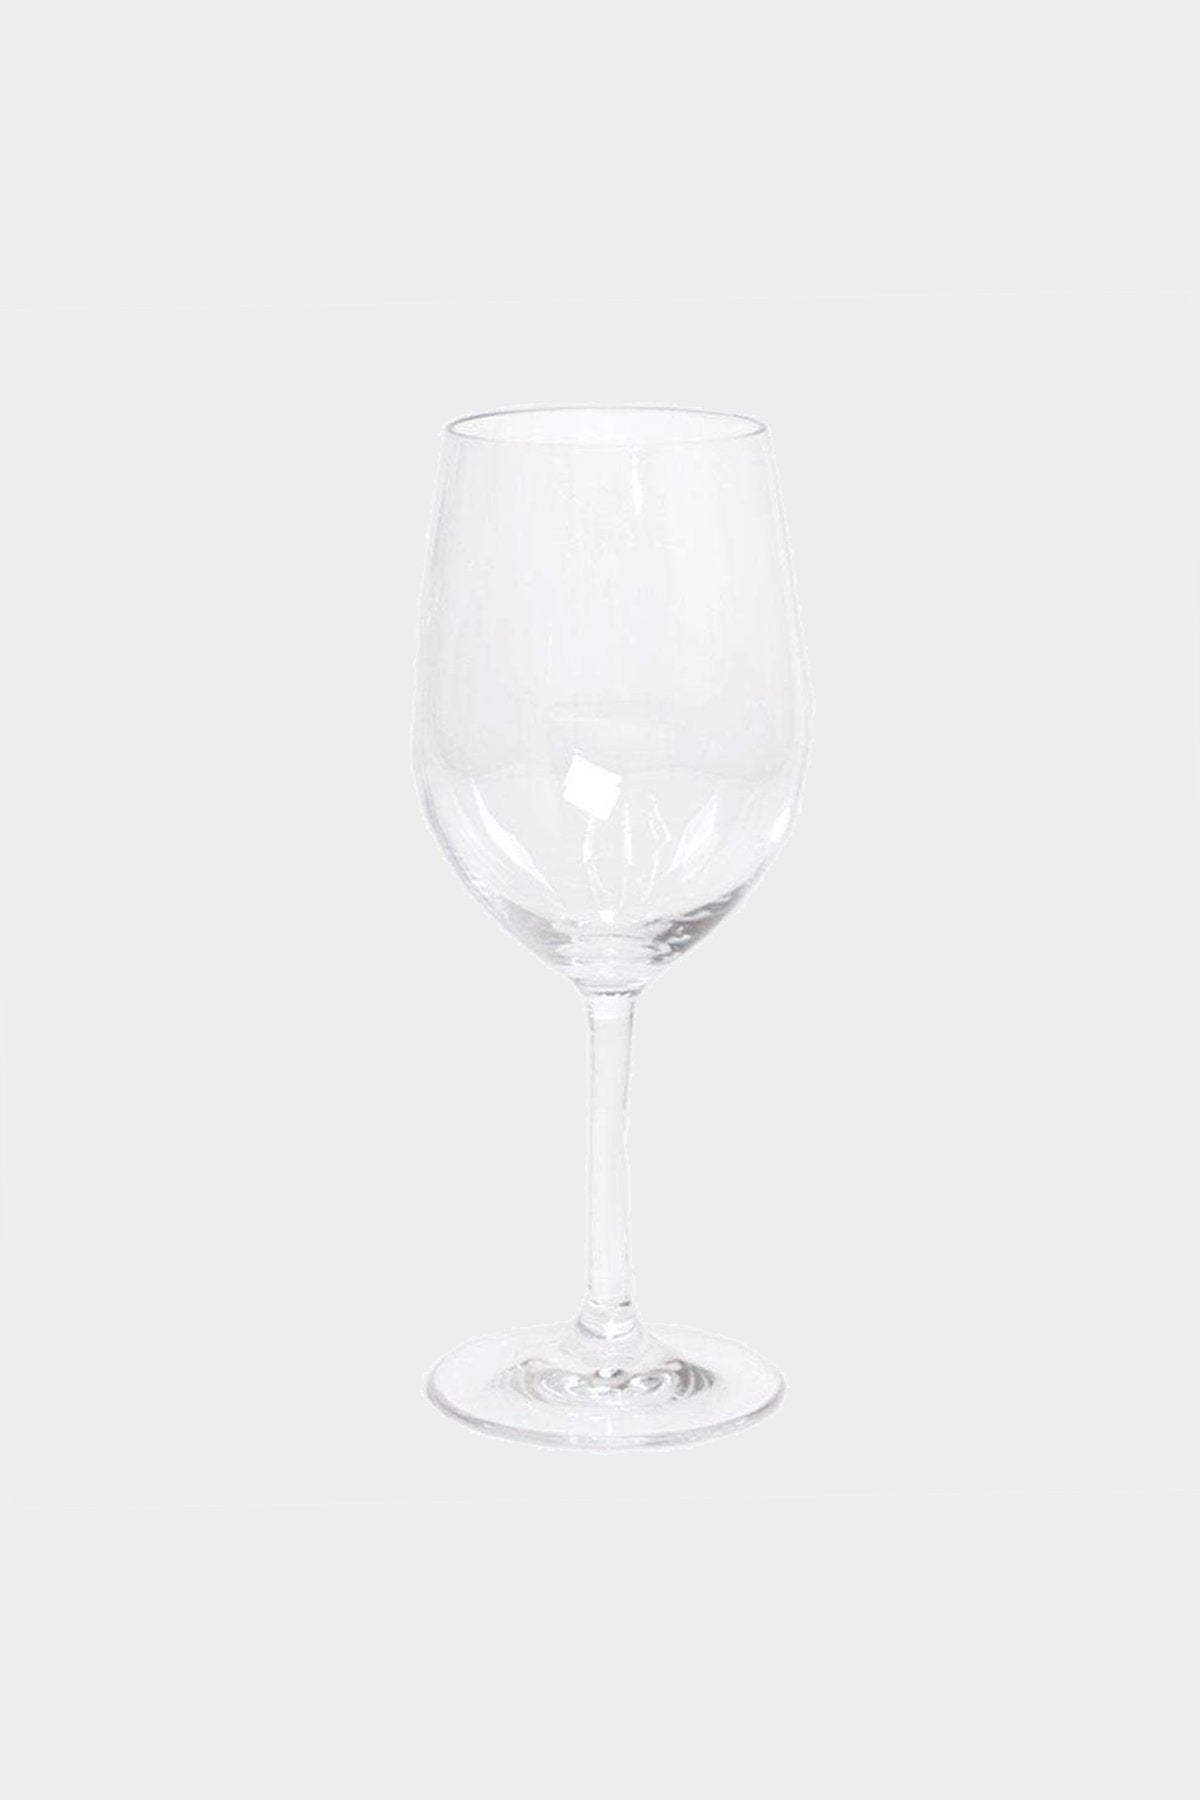 Acrylic 12oz White Wine Glass in Crystal Clear - shop-olivia.com